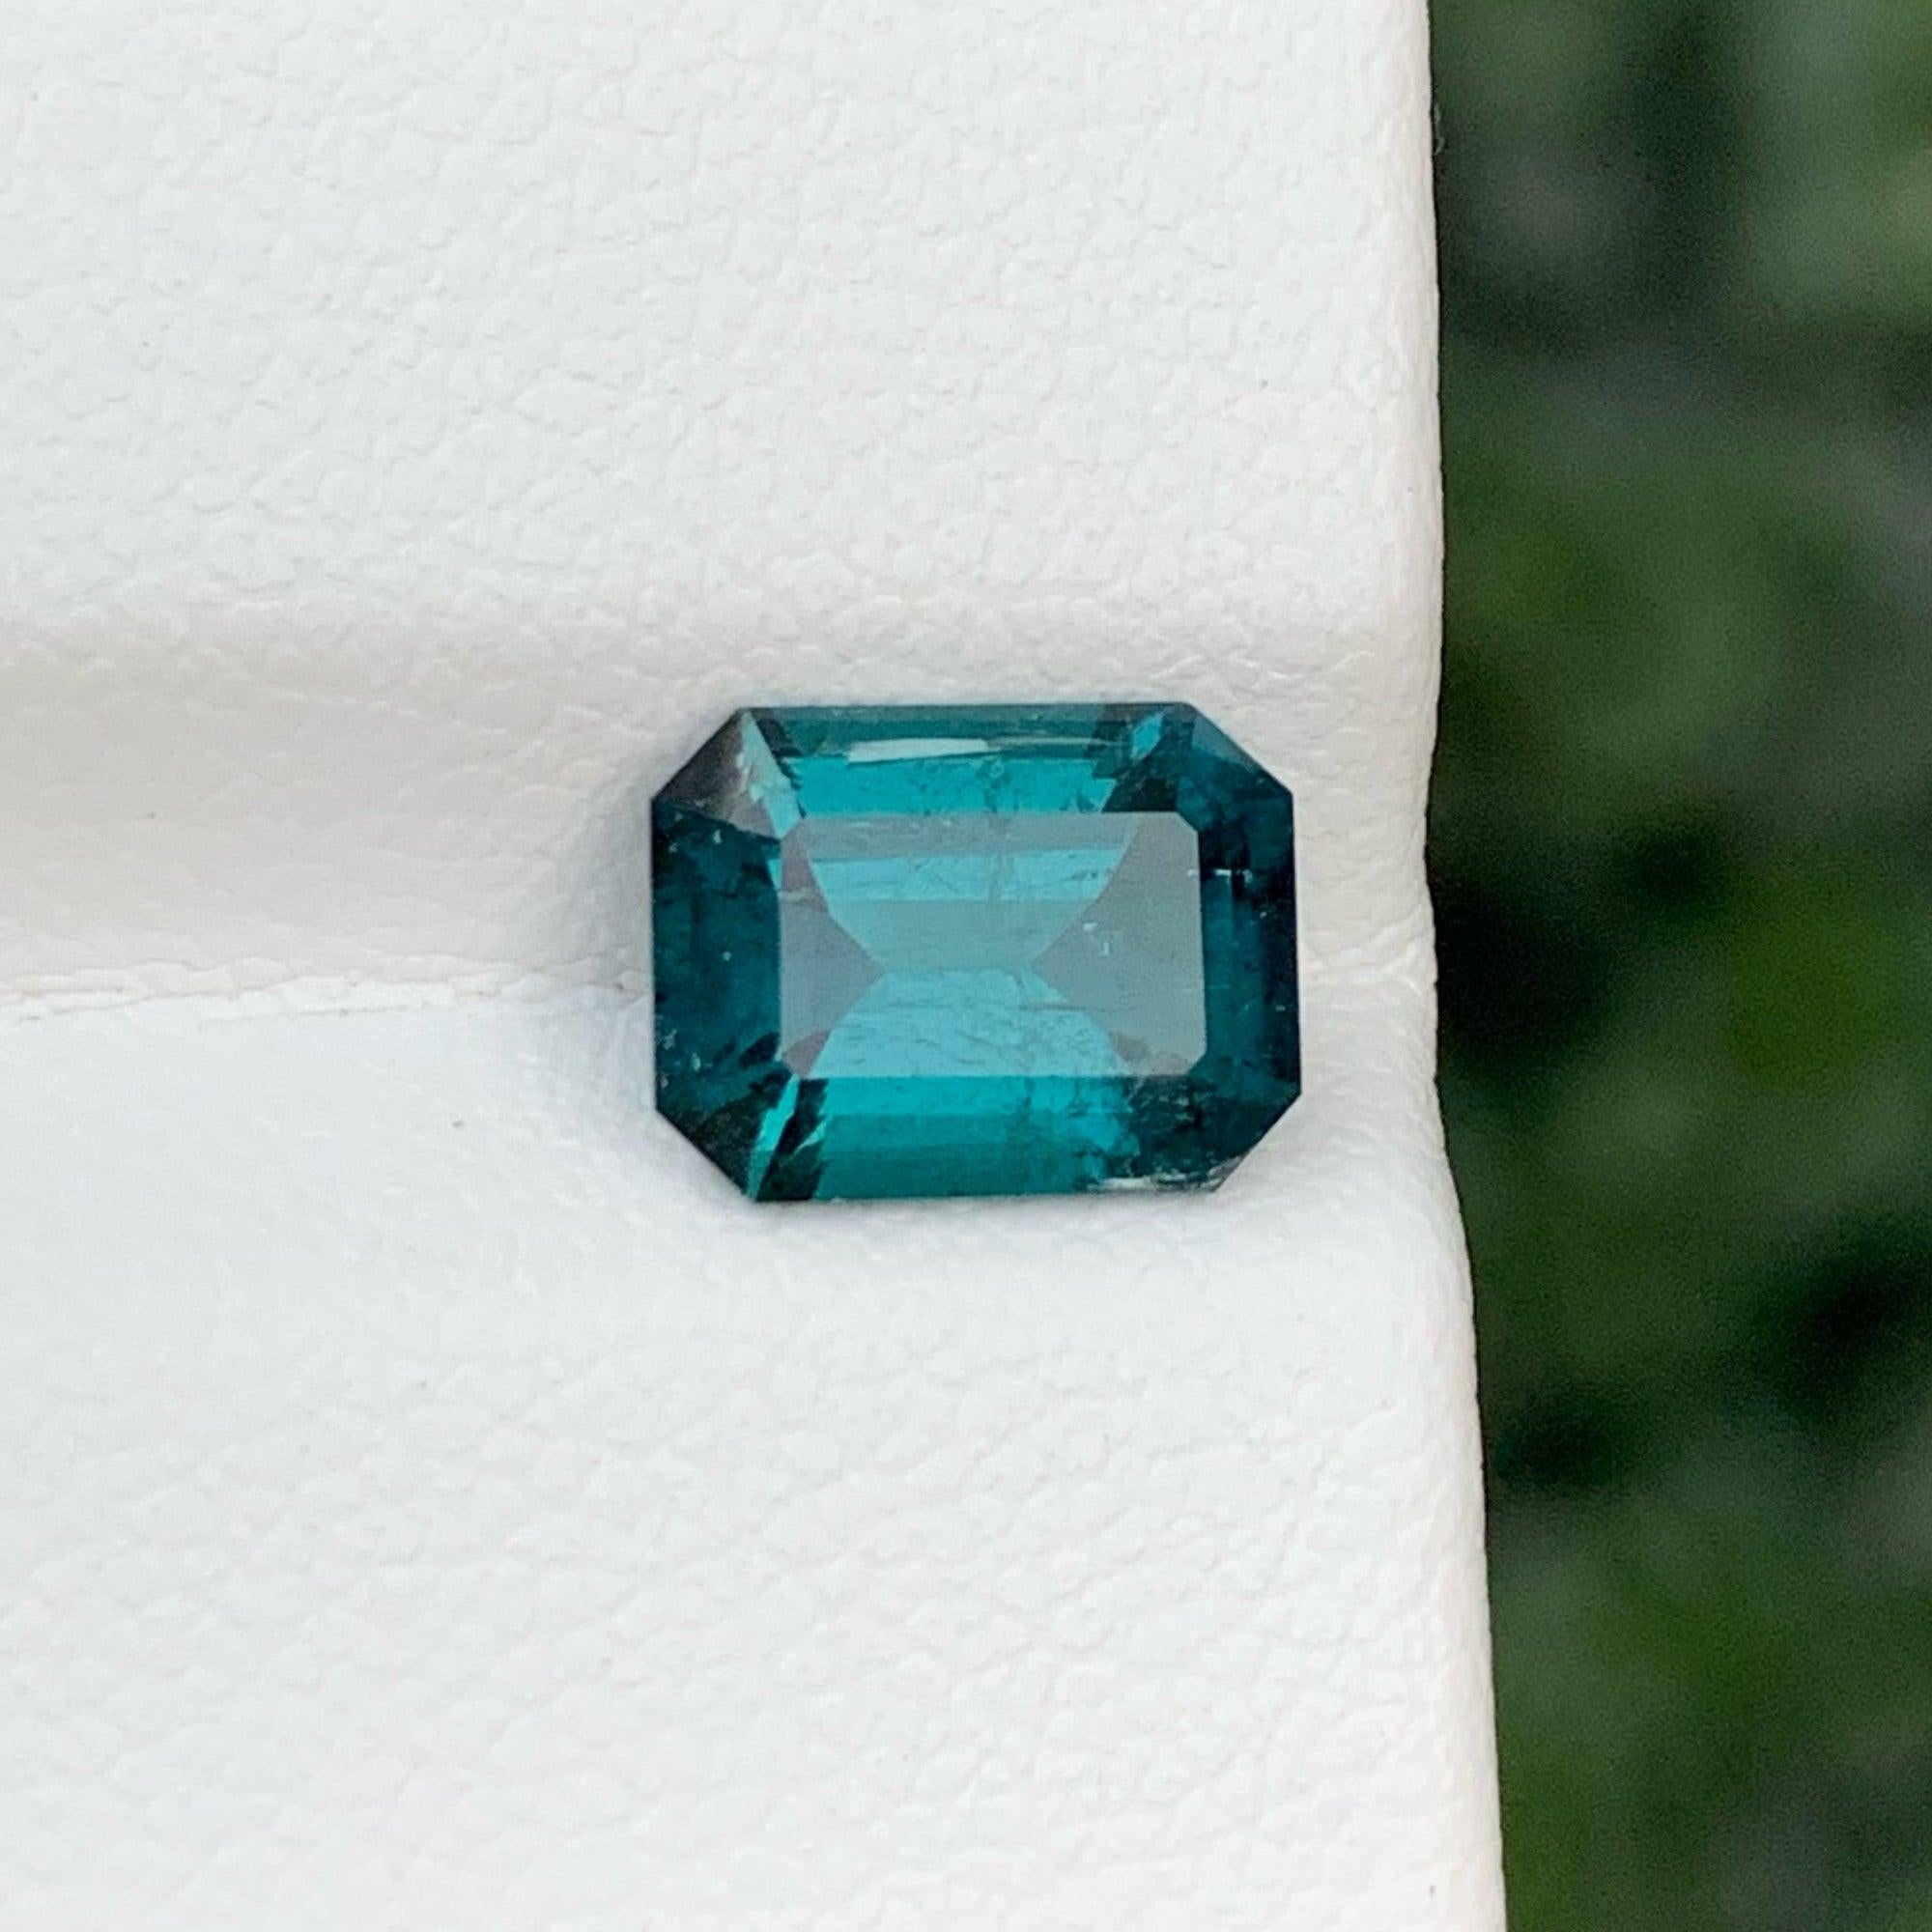 Gorgeous Indicolite Tourmaline Stone of 2.15 carats from Africa has a wonderful cut in a Octagon shape, incredible Greenish-blue color. Great brilliance. This gem is SI Clarity.

Product Information:
GEMSTONE TYPE:	Gorgeous Indicolite Tourmaline